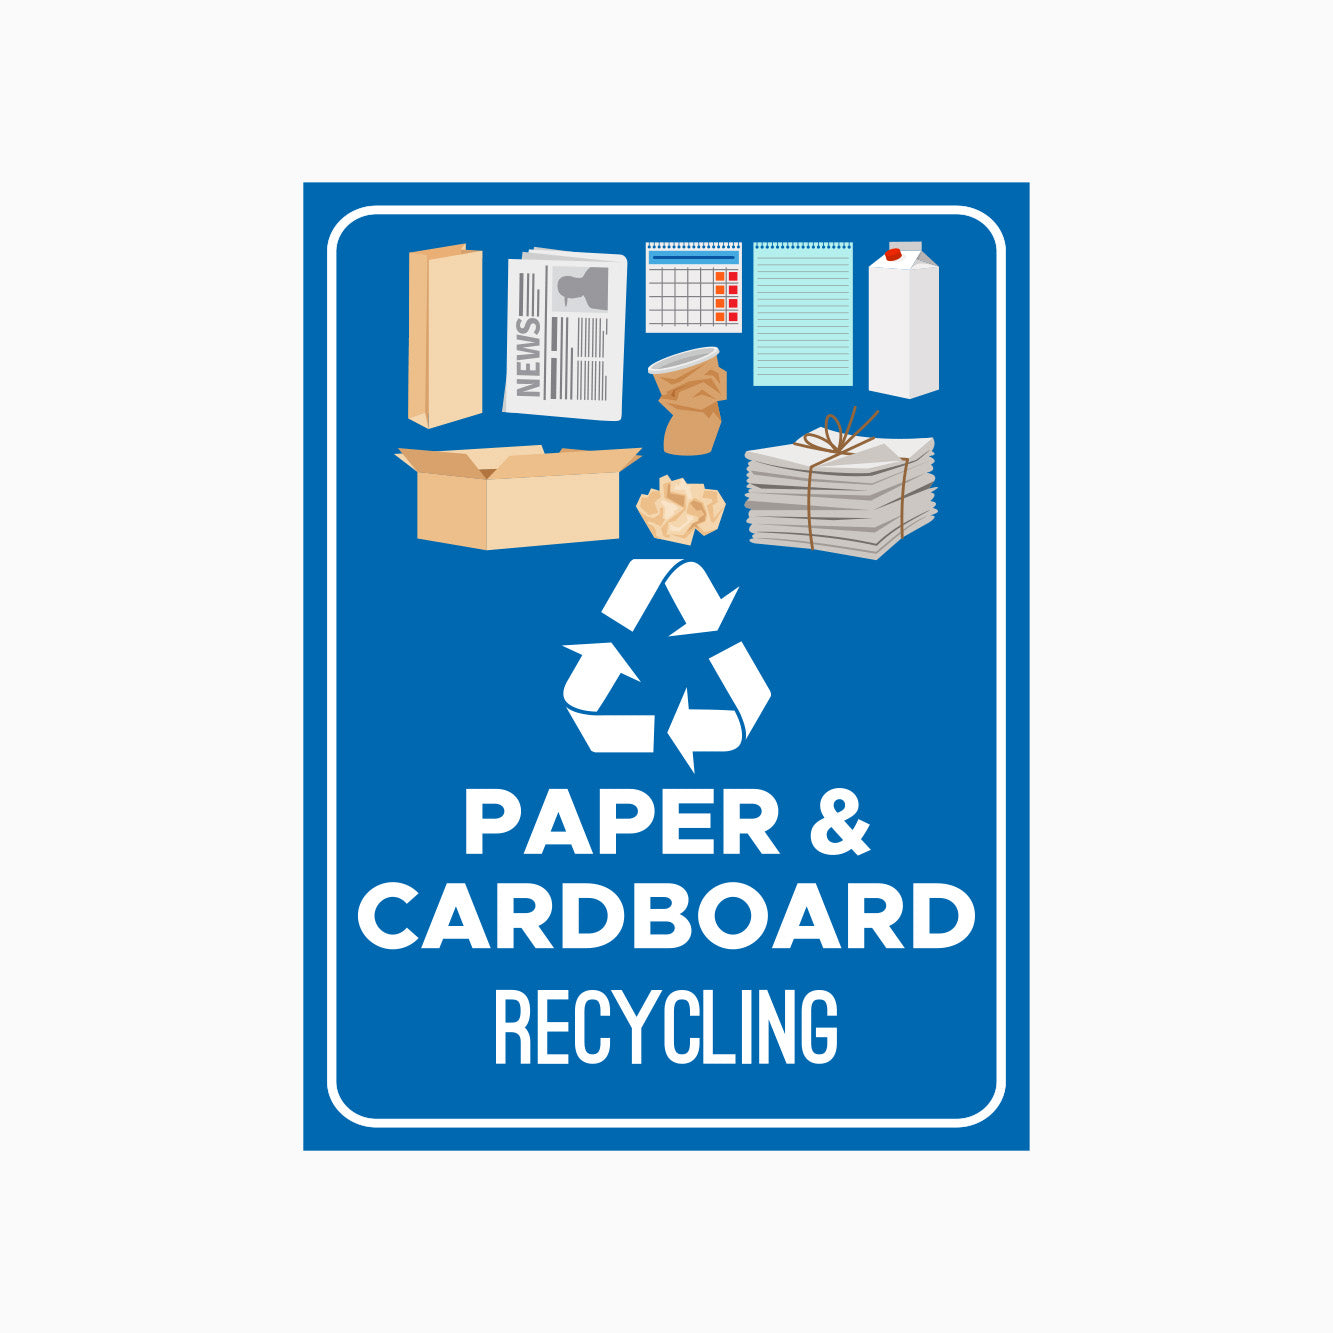 PAPER & CARDBOARD RECYCLING SIGN - RECYCLING SIGN FROM GET SIGNS - ONLINE SHOP